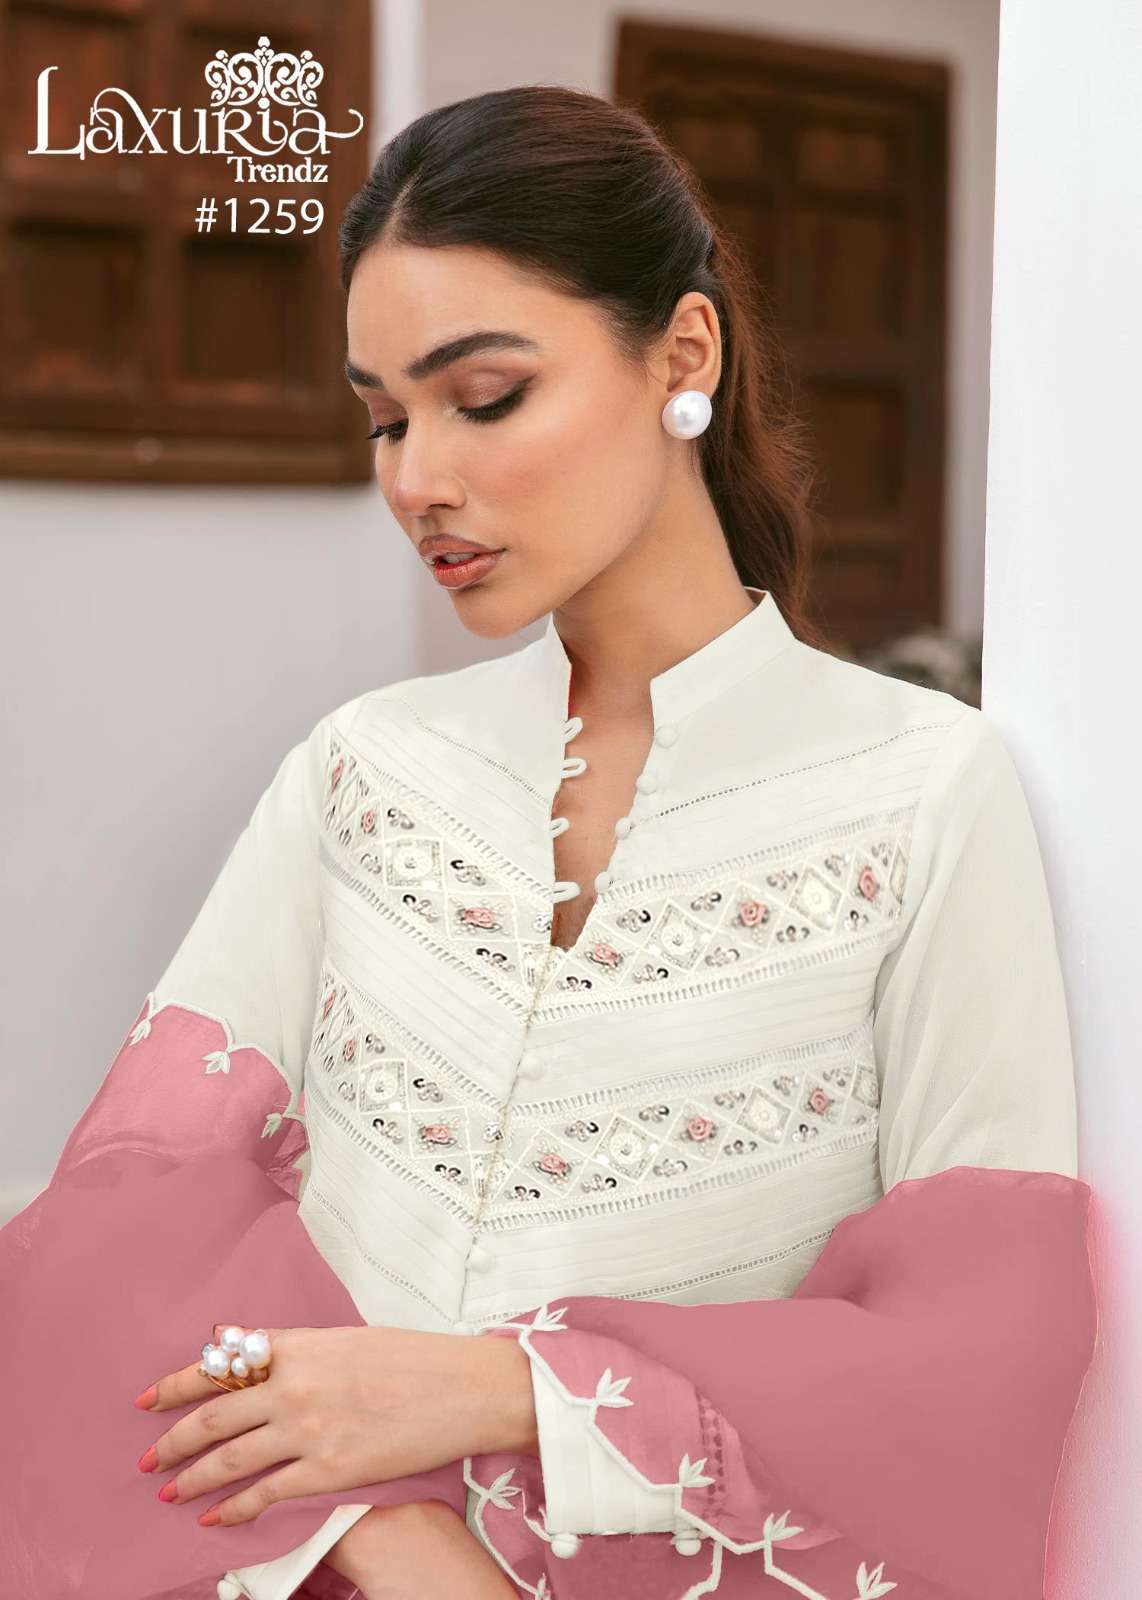 naimat nfs 1063 Pure Fox embroidery work suit